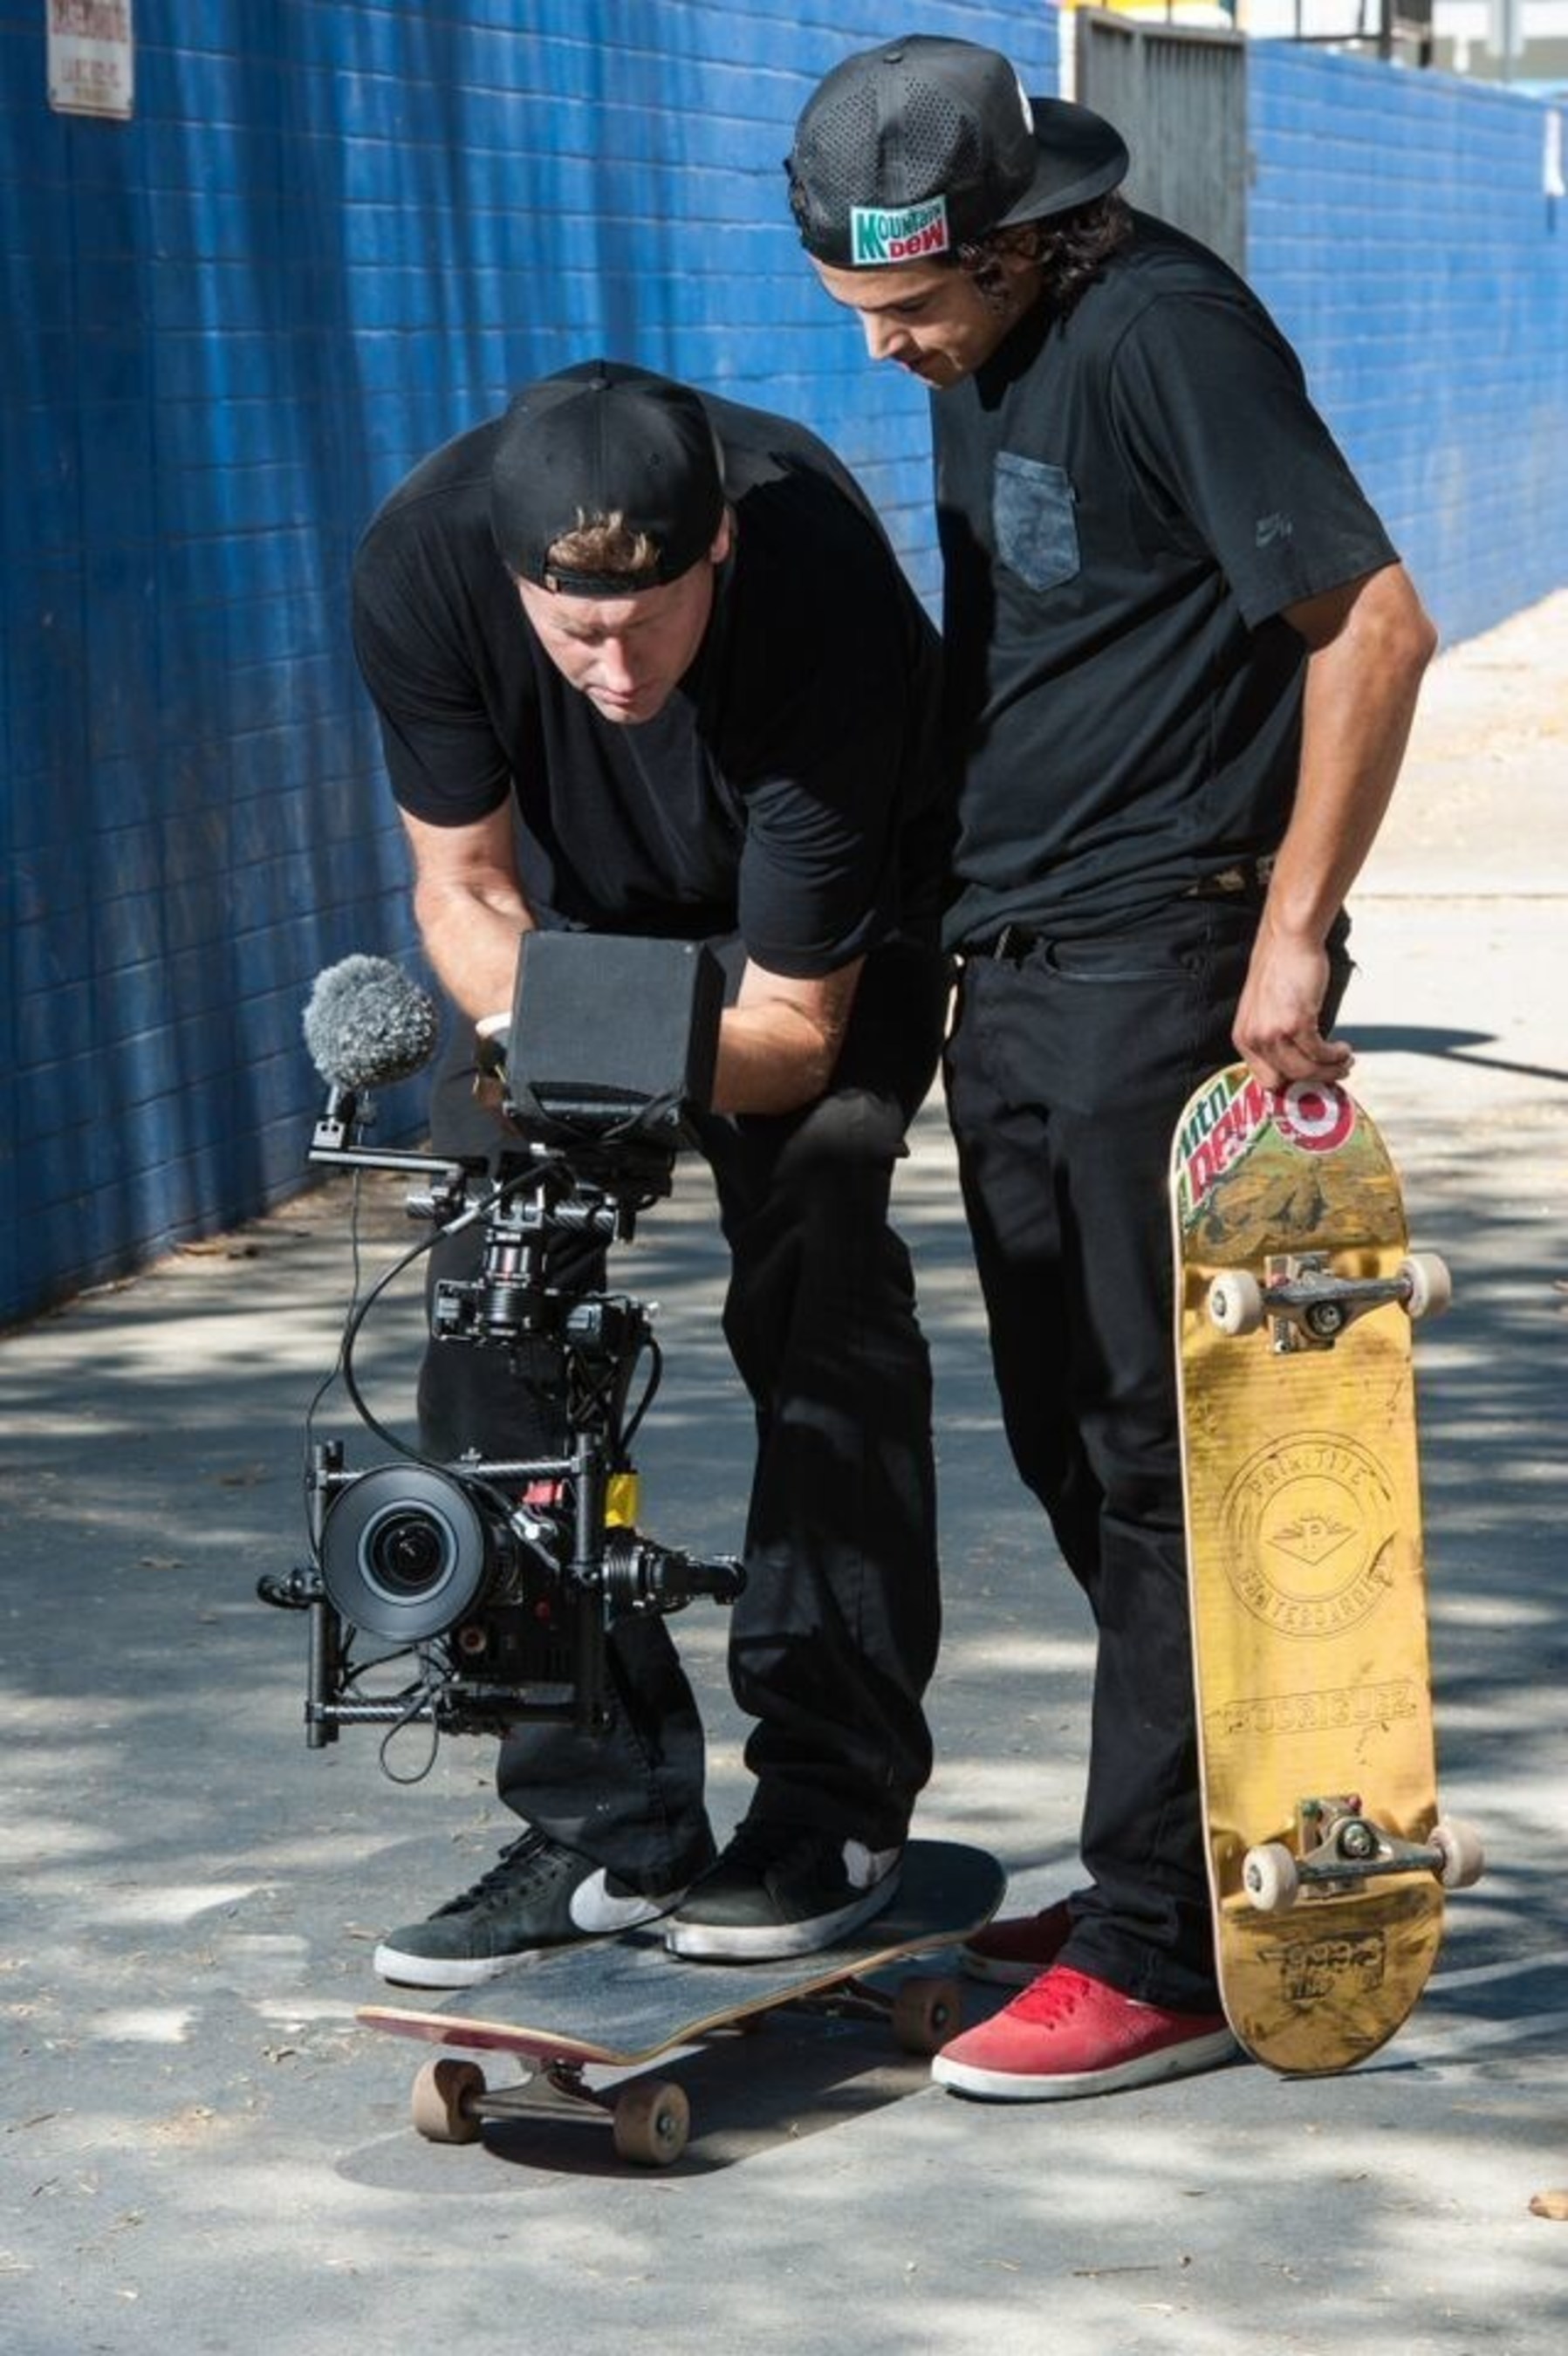 Director Ty Evans and professional skateboarder Paul Rodriguez review footage on the set of WE ARE BLOOD, a film produced by Mtn Dew Green Label Films in association with Brain Farm that celebrates the universal bond created by the simple act of skateboarding.